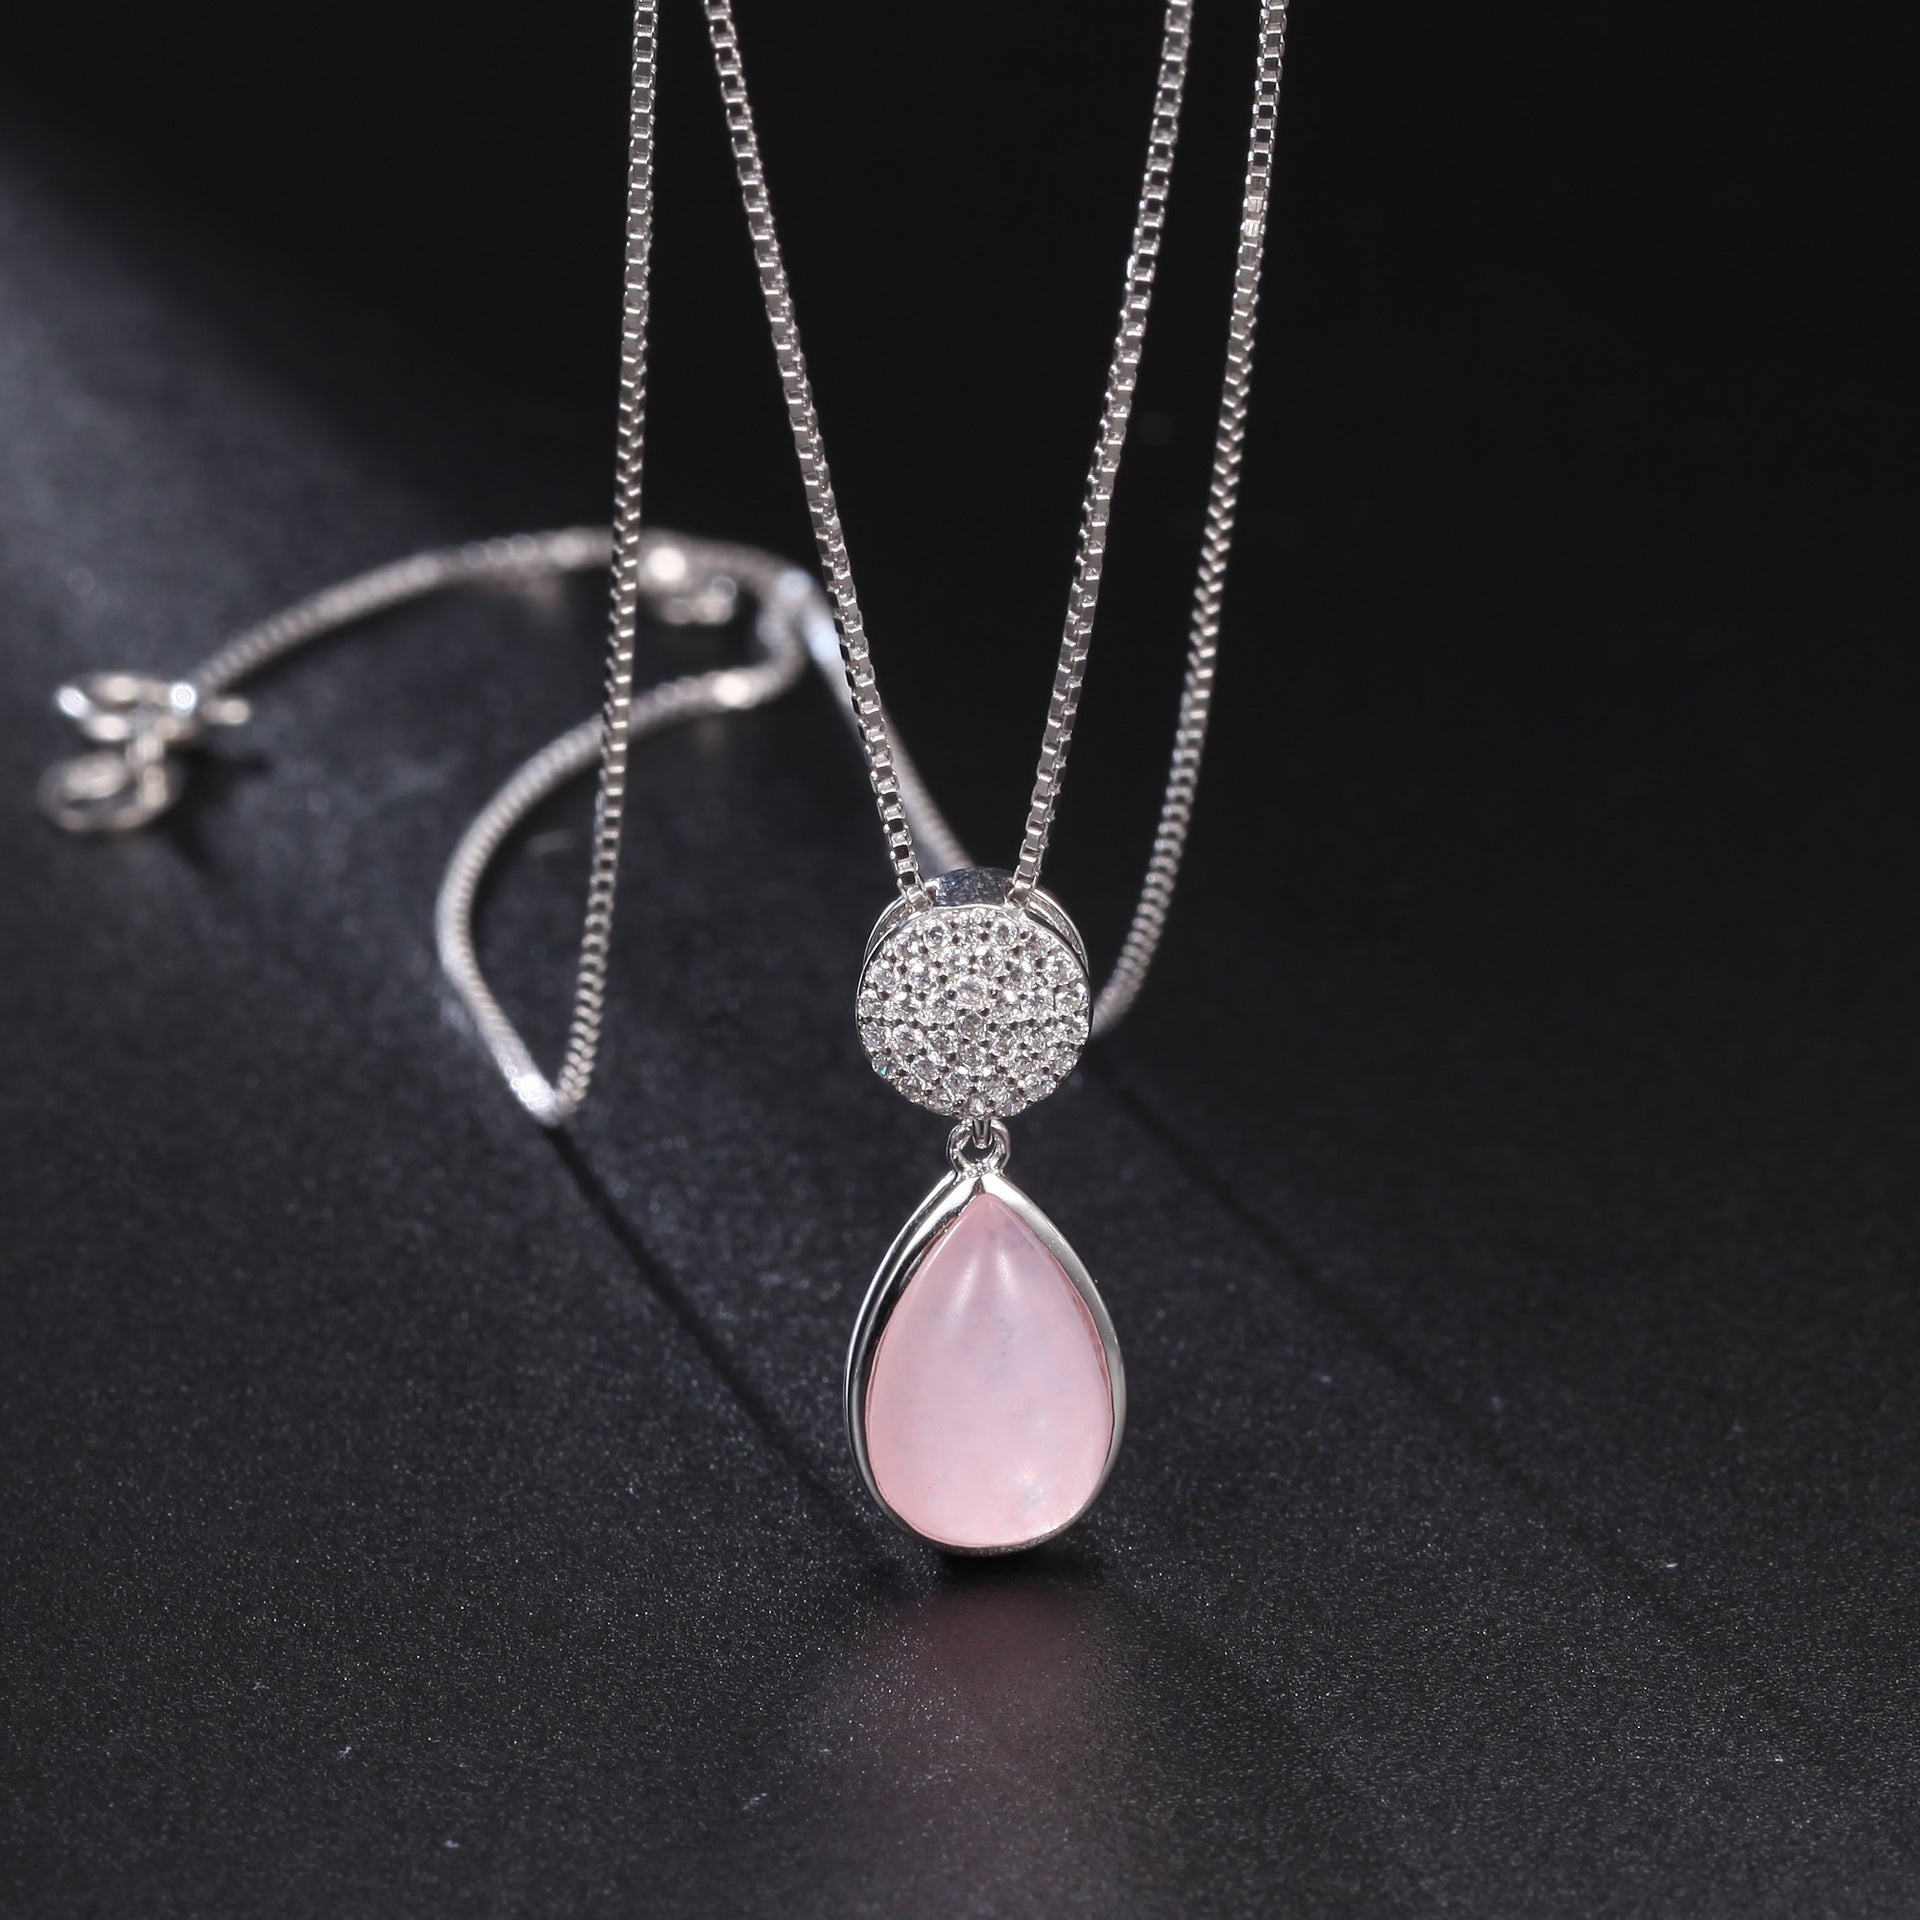 French Romantic Luxury Style Inlaid Pink Crystal Pear Drop Pendant Silver Necklace for Women